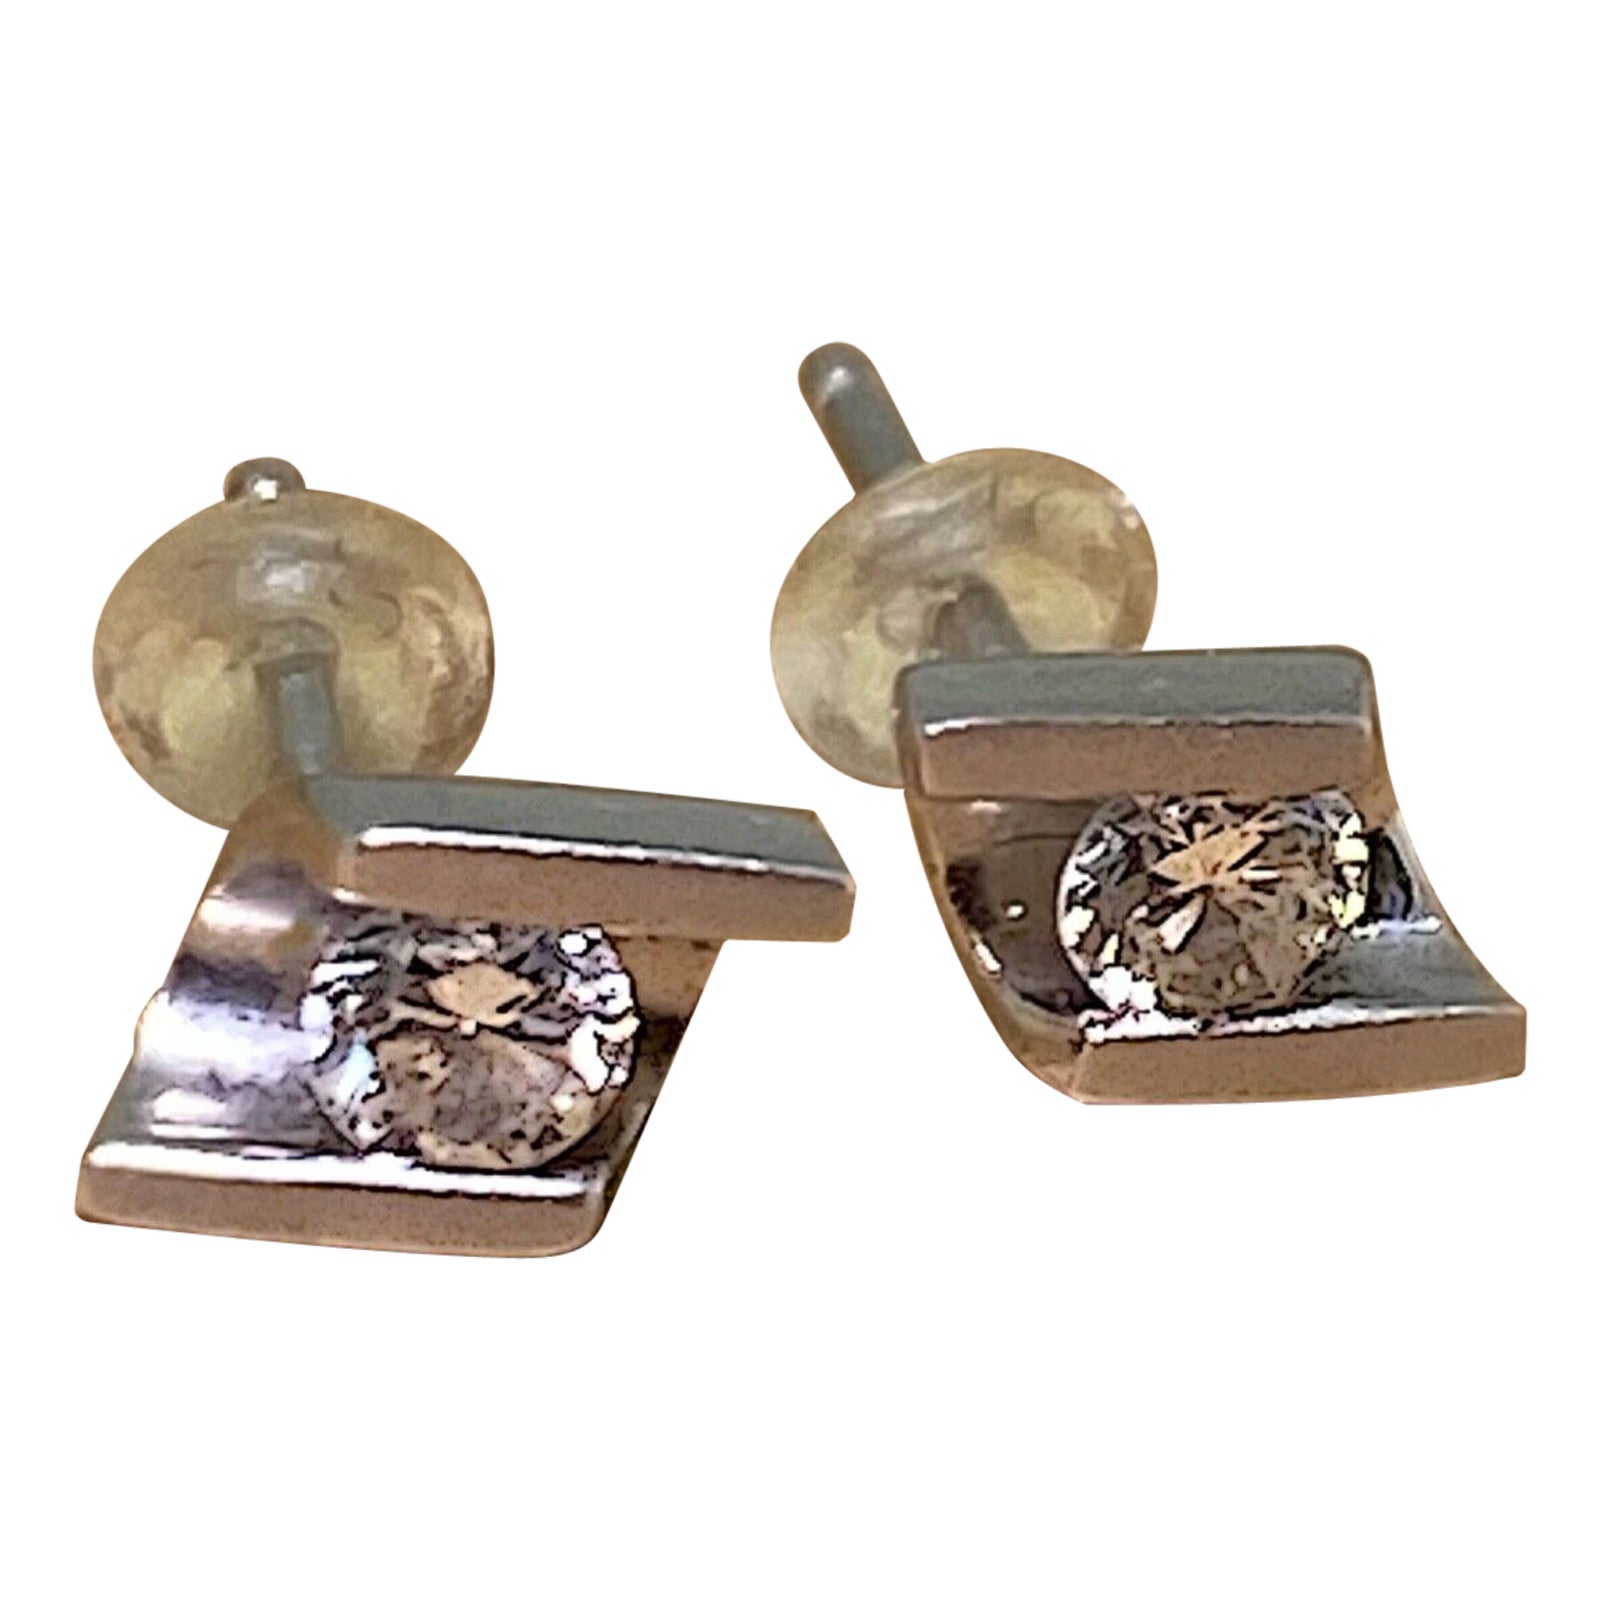 0.12ct Diamond Stud Earrings in Platinum 900. Colour: G, Clarity: VS. For Sale